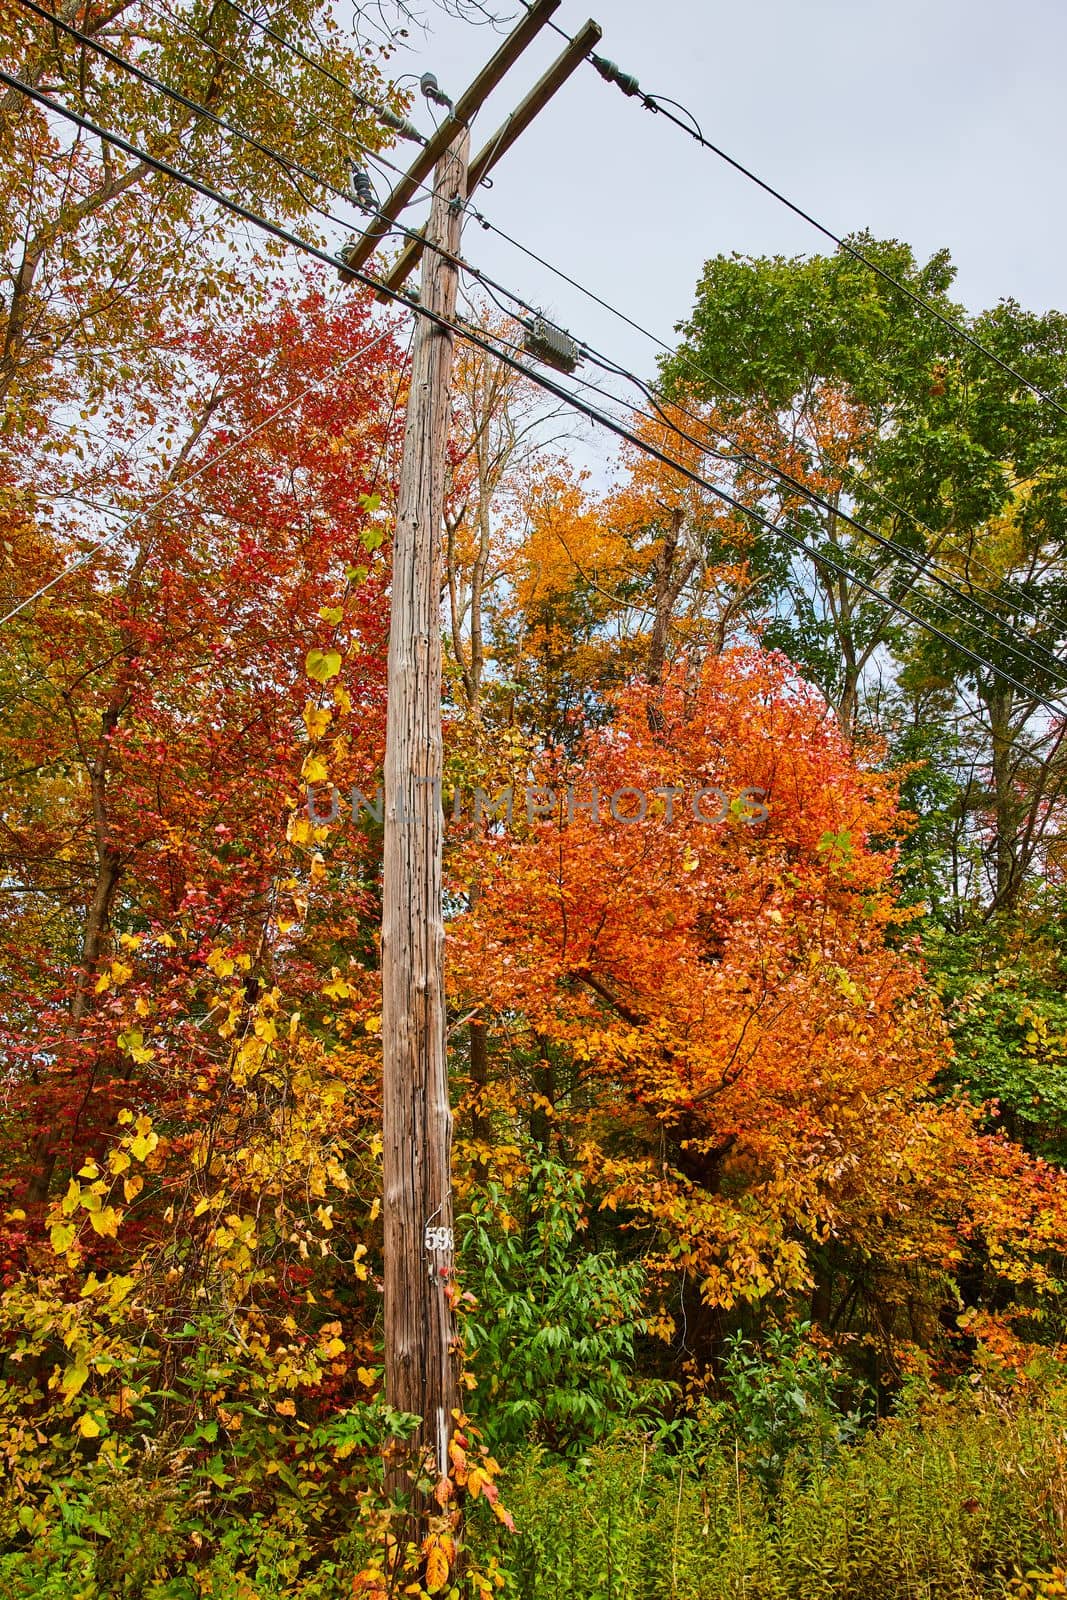 Telephone pole for communication in peak fall surrounded by orange, yellow, red, and green leaves by njproductions